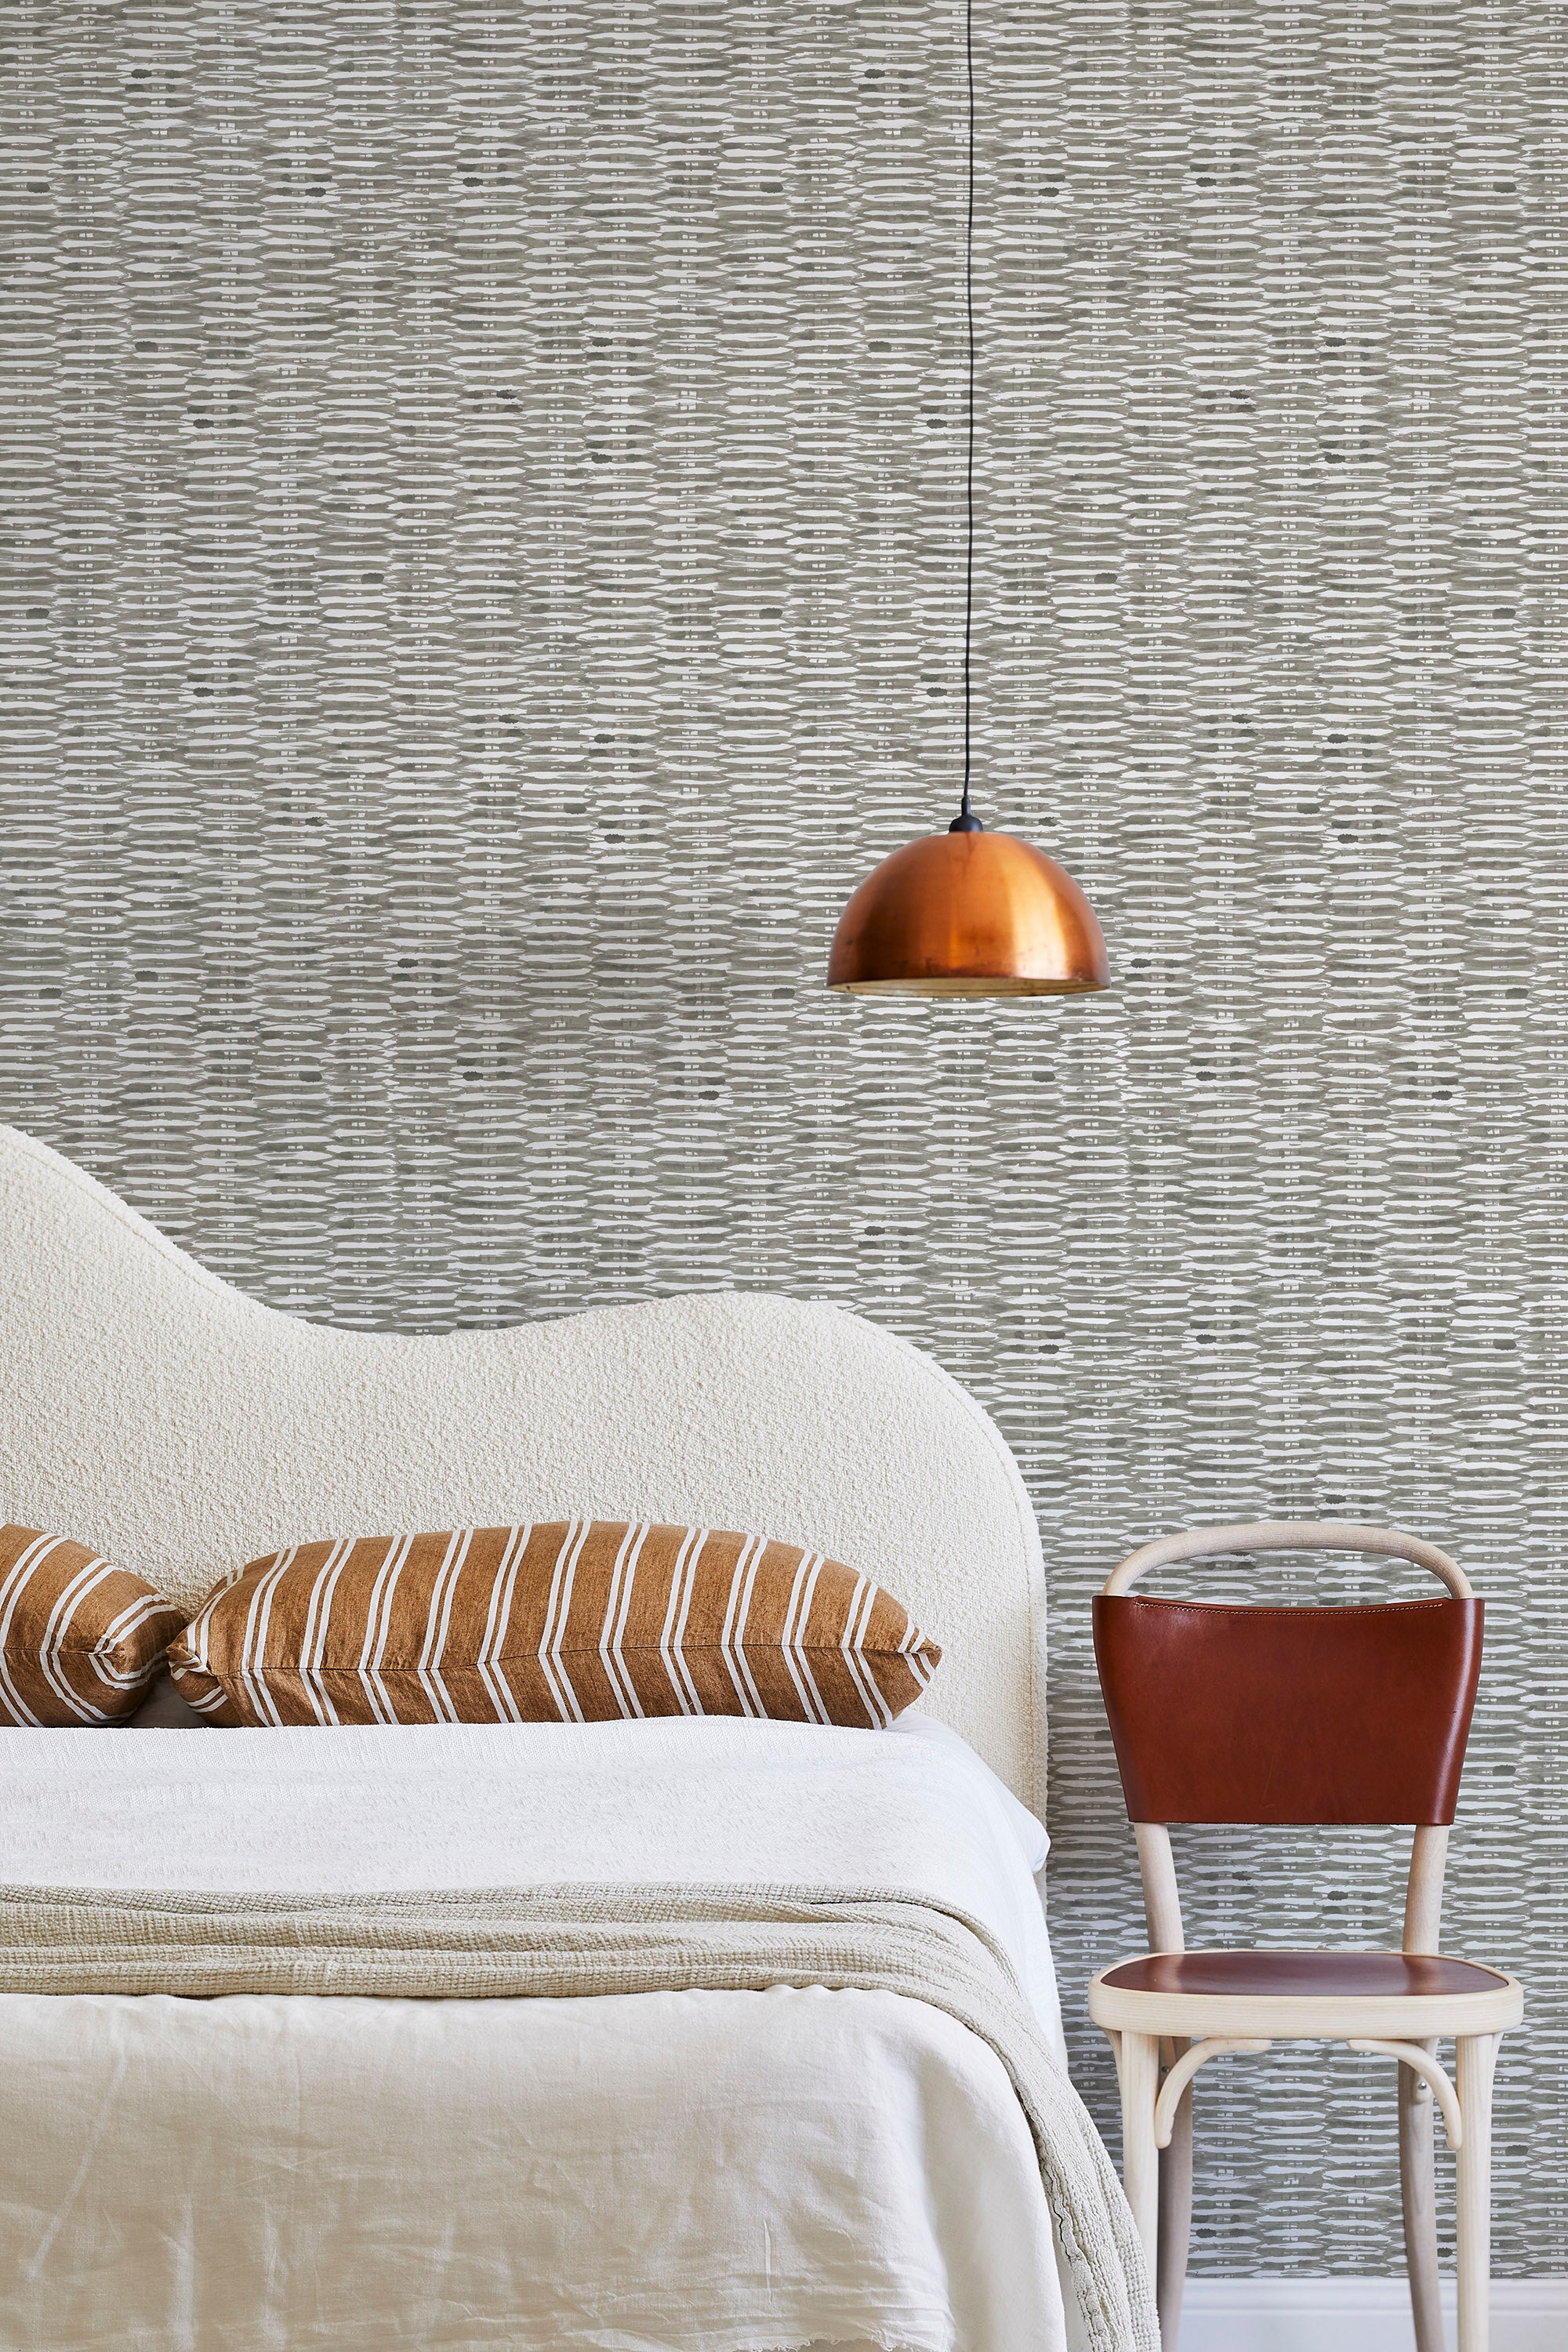 A modernist bed, hanging lamp and chair stand in front of a wall papered in a textural checked print in gray and white.